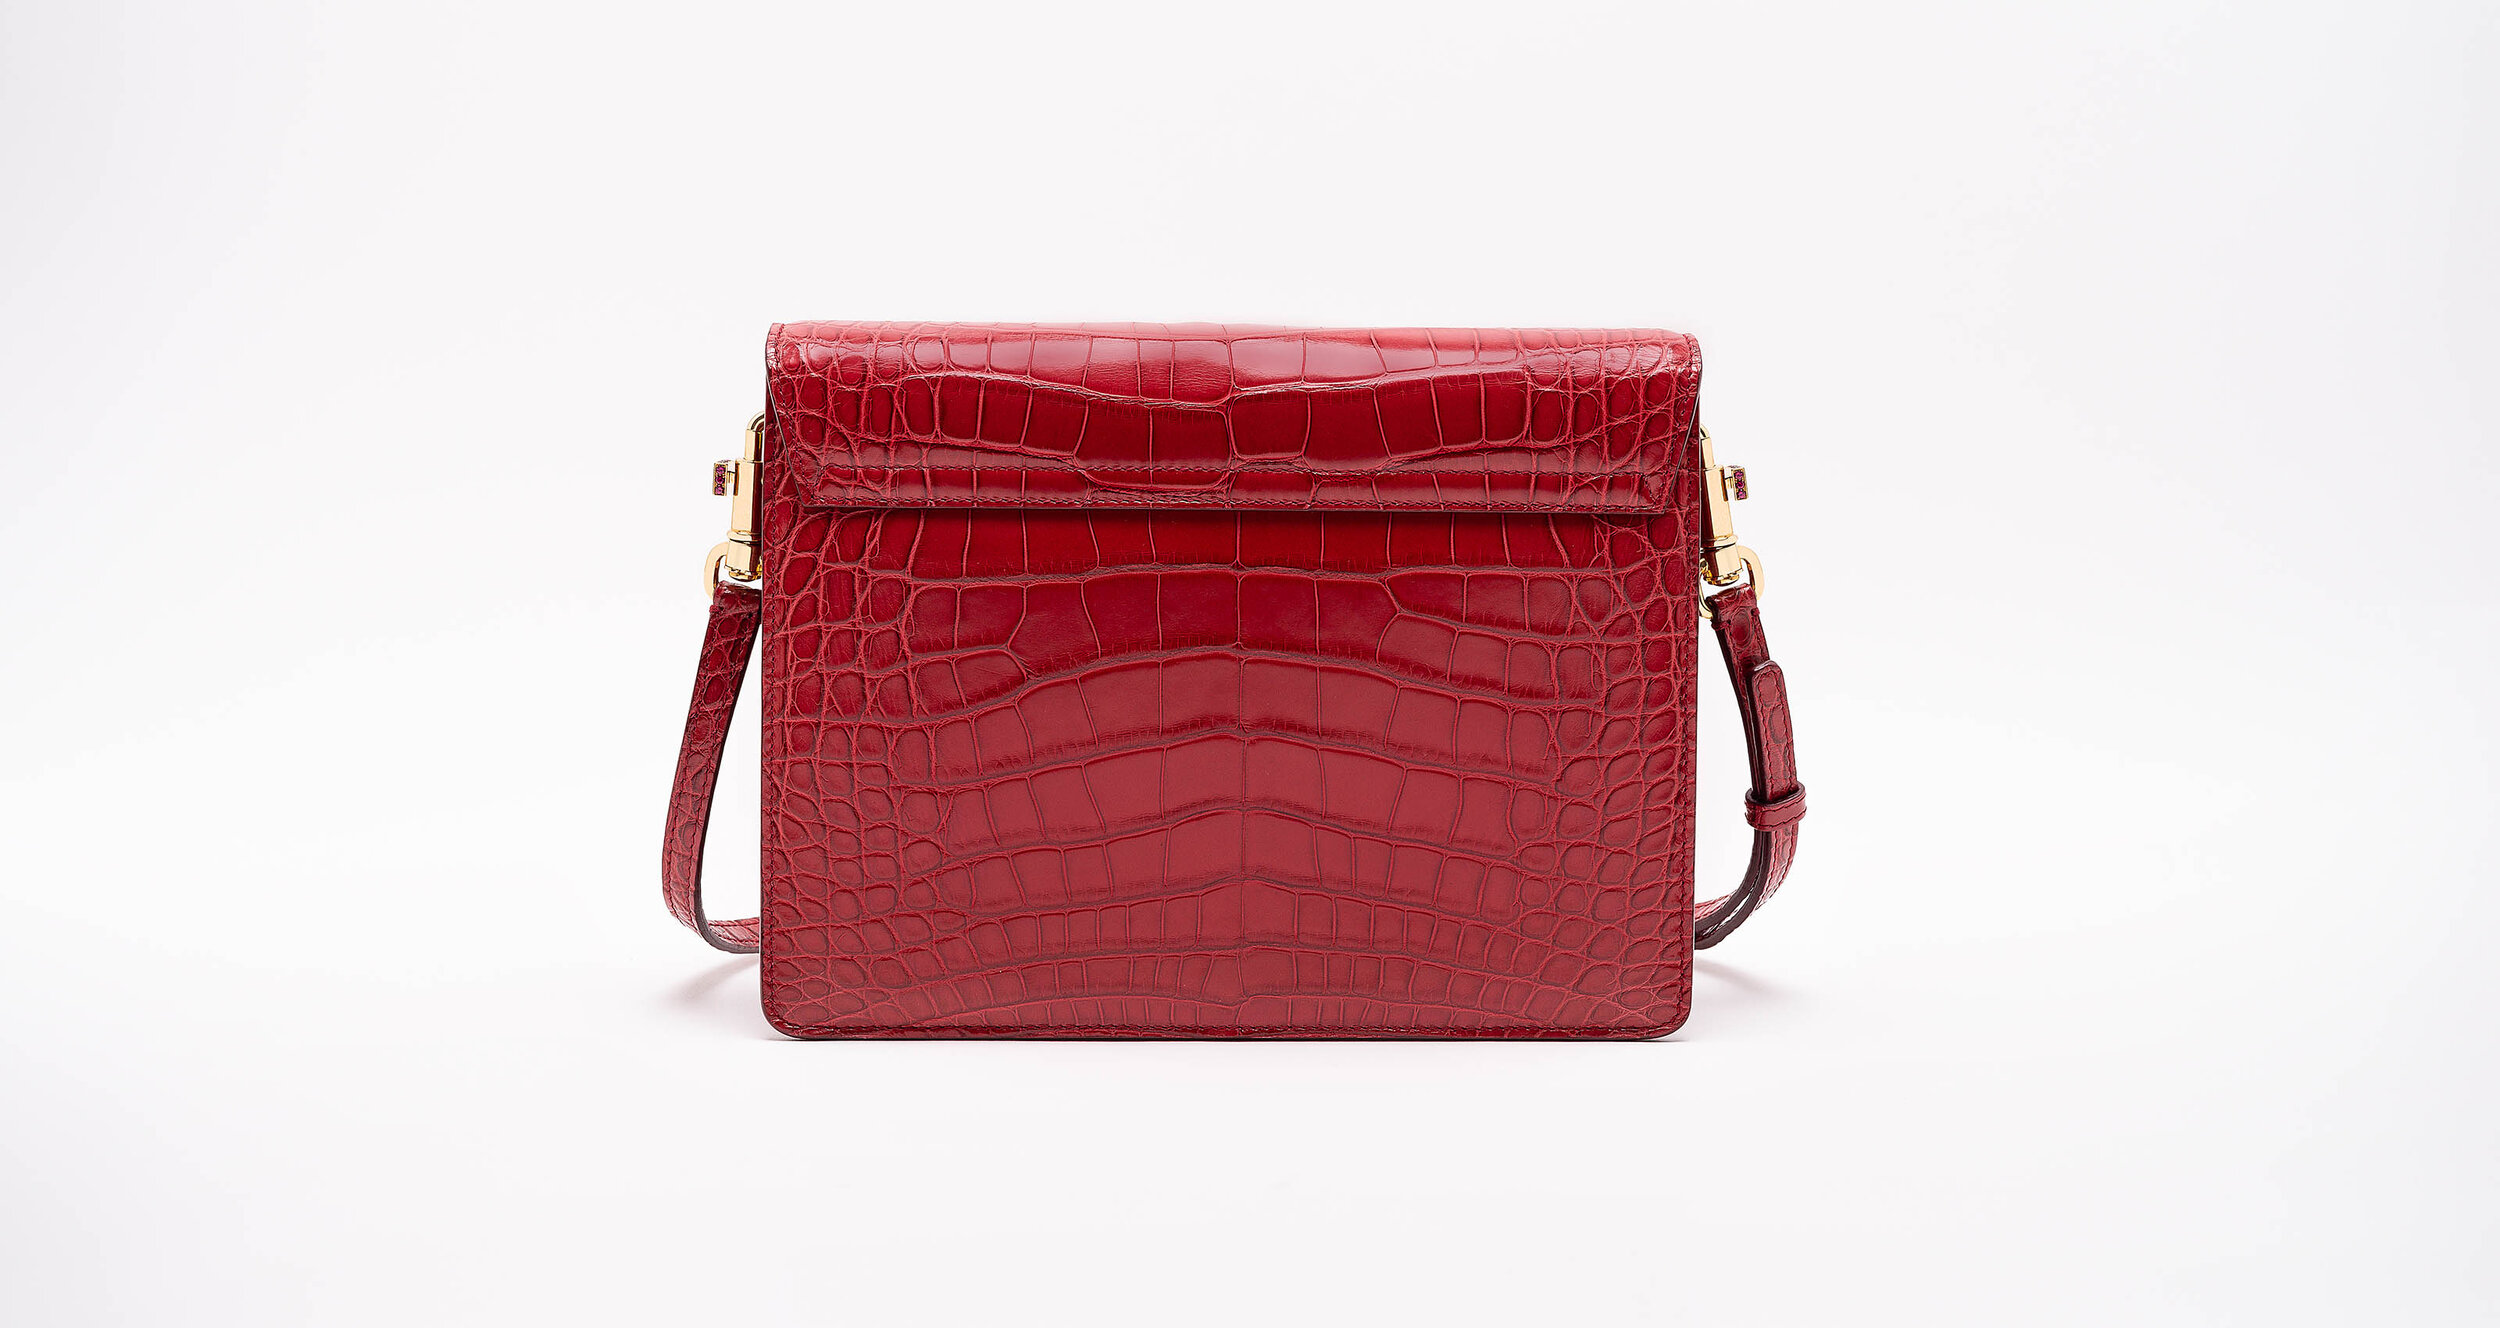 limited-editions-dolce-gabbana-lucia-bag-red-2.jpg